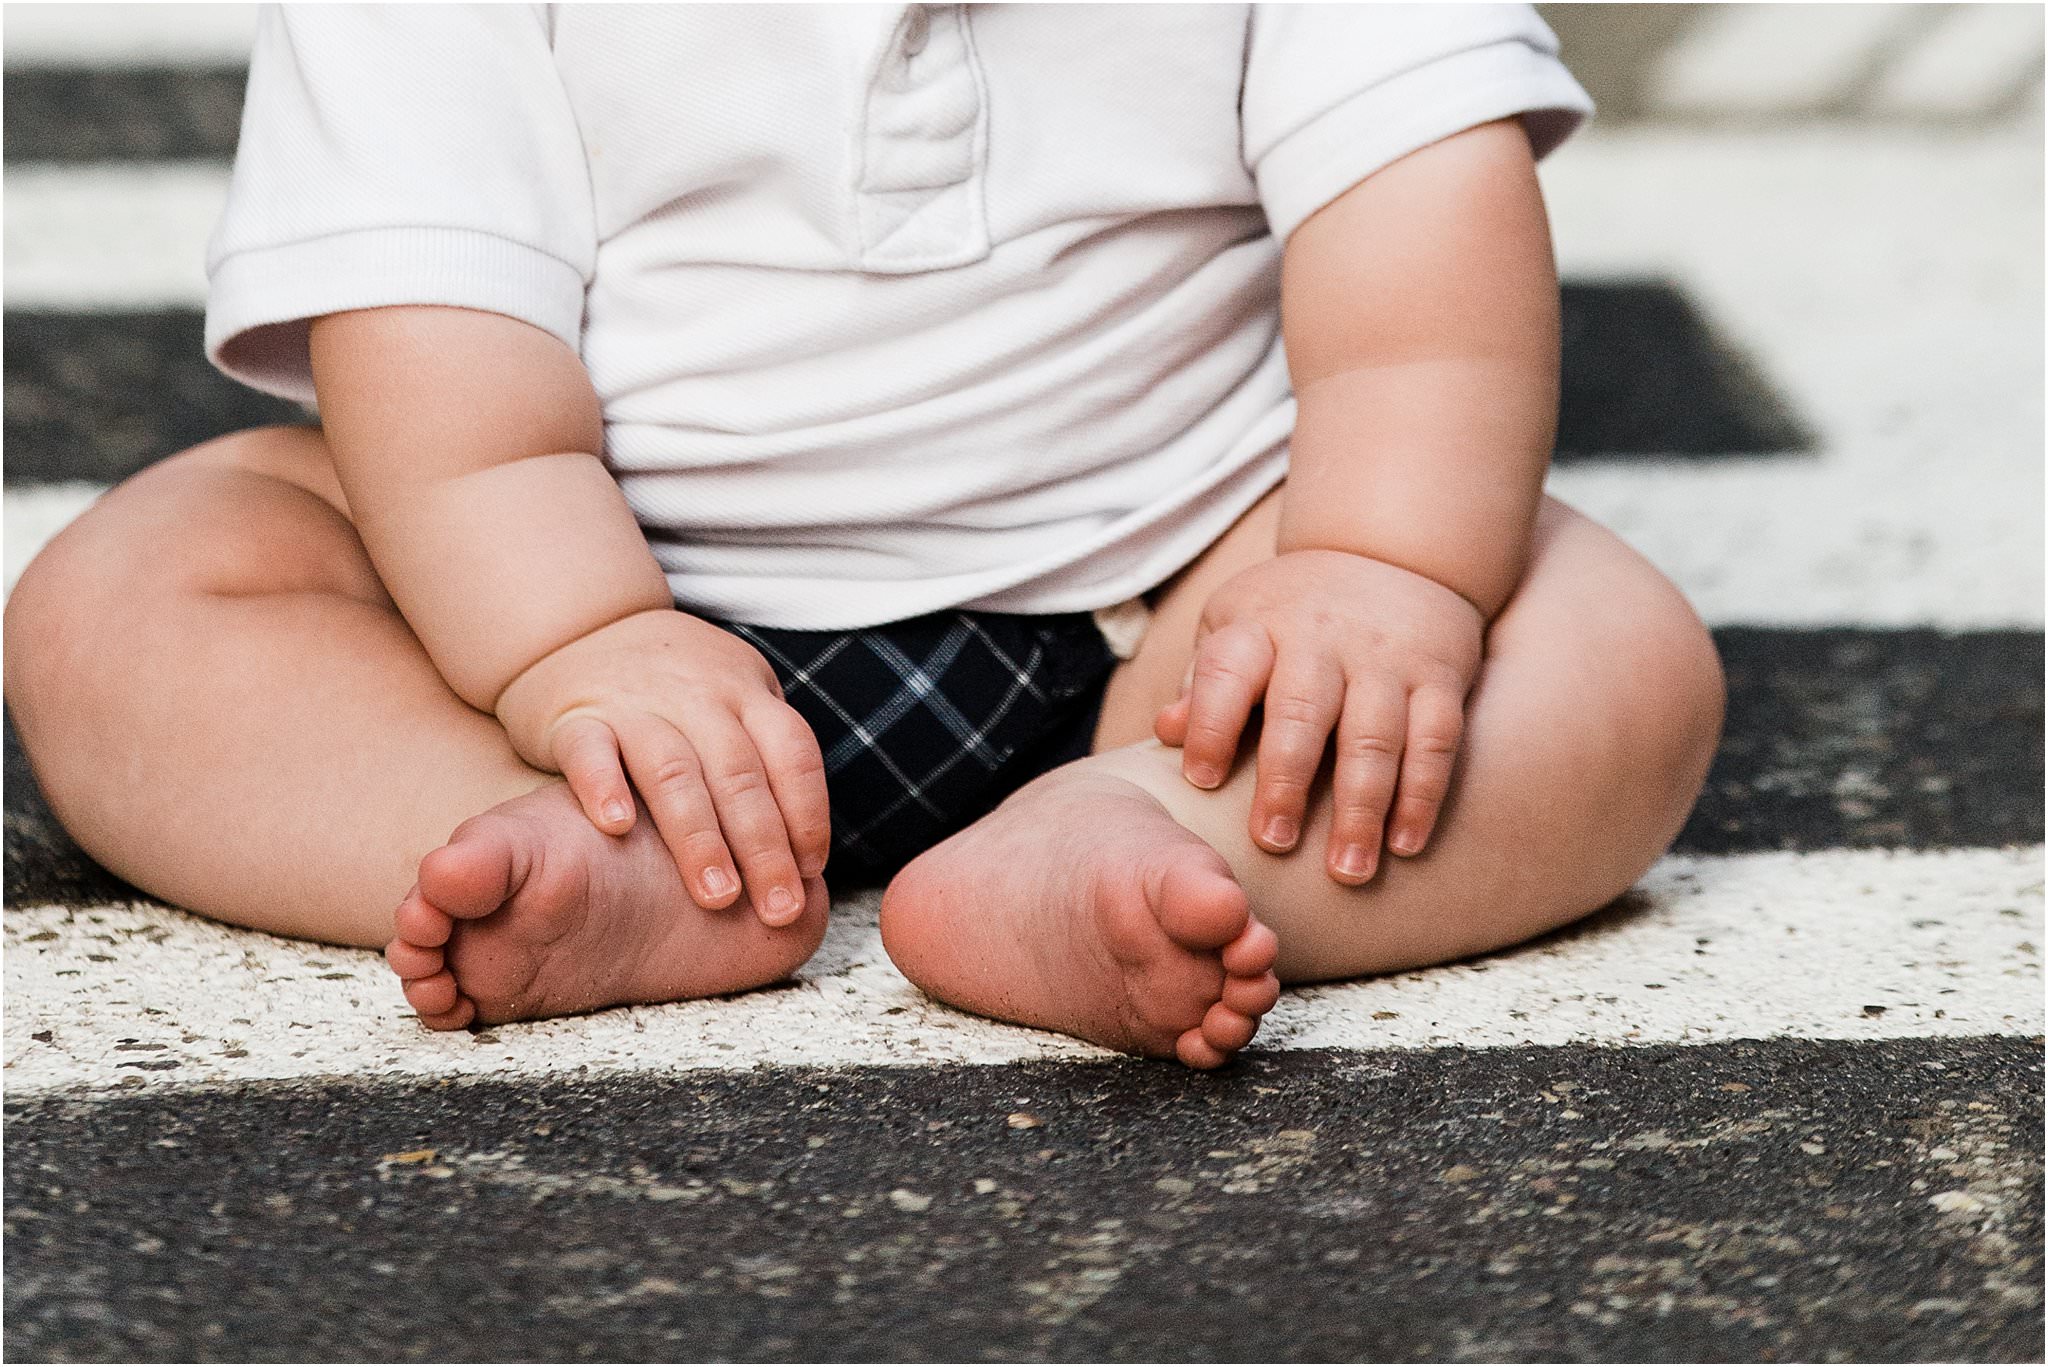 chubby baby feet and hands